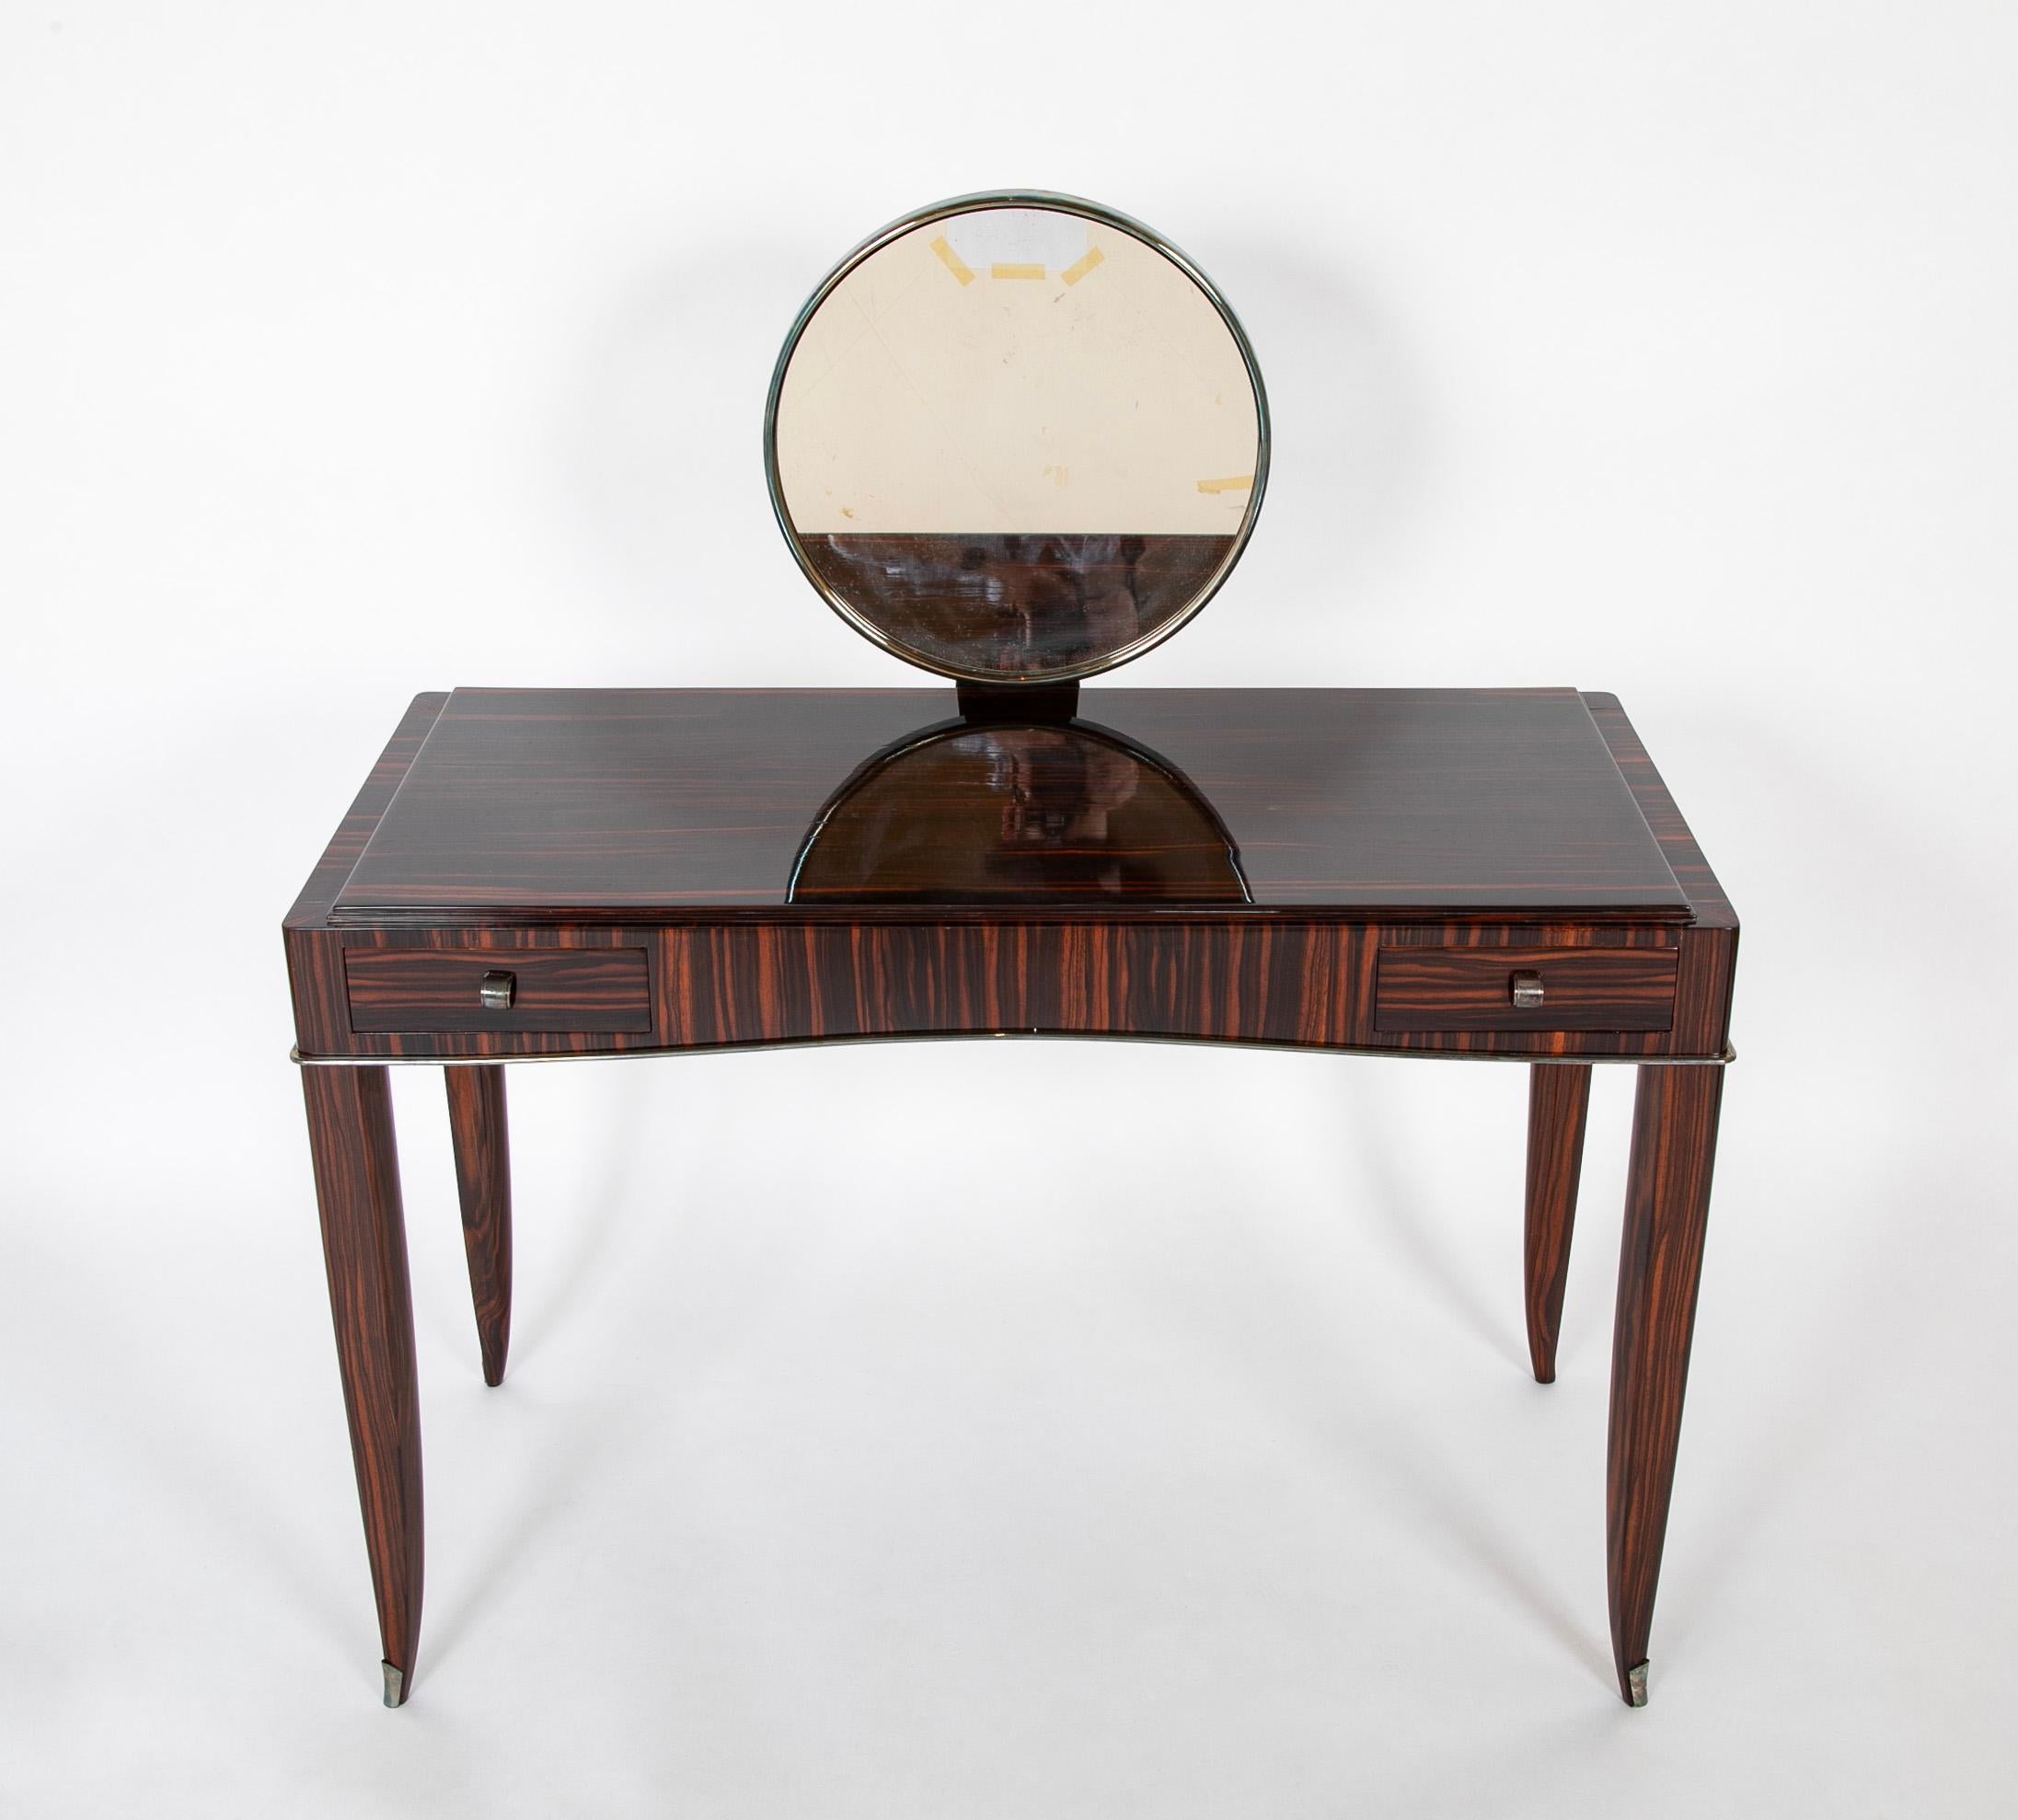 A dressing table / desk designed by  Andre Domin and Marcel Genevriere, better known as Dominique.   The two drawer dressing table is in Macassar Ebony.  The removable silver plated bronze round mirror and hardware (Sabot and trim) were most likely